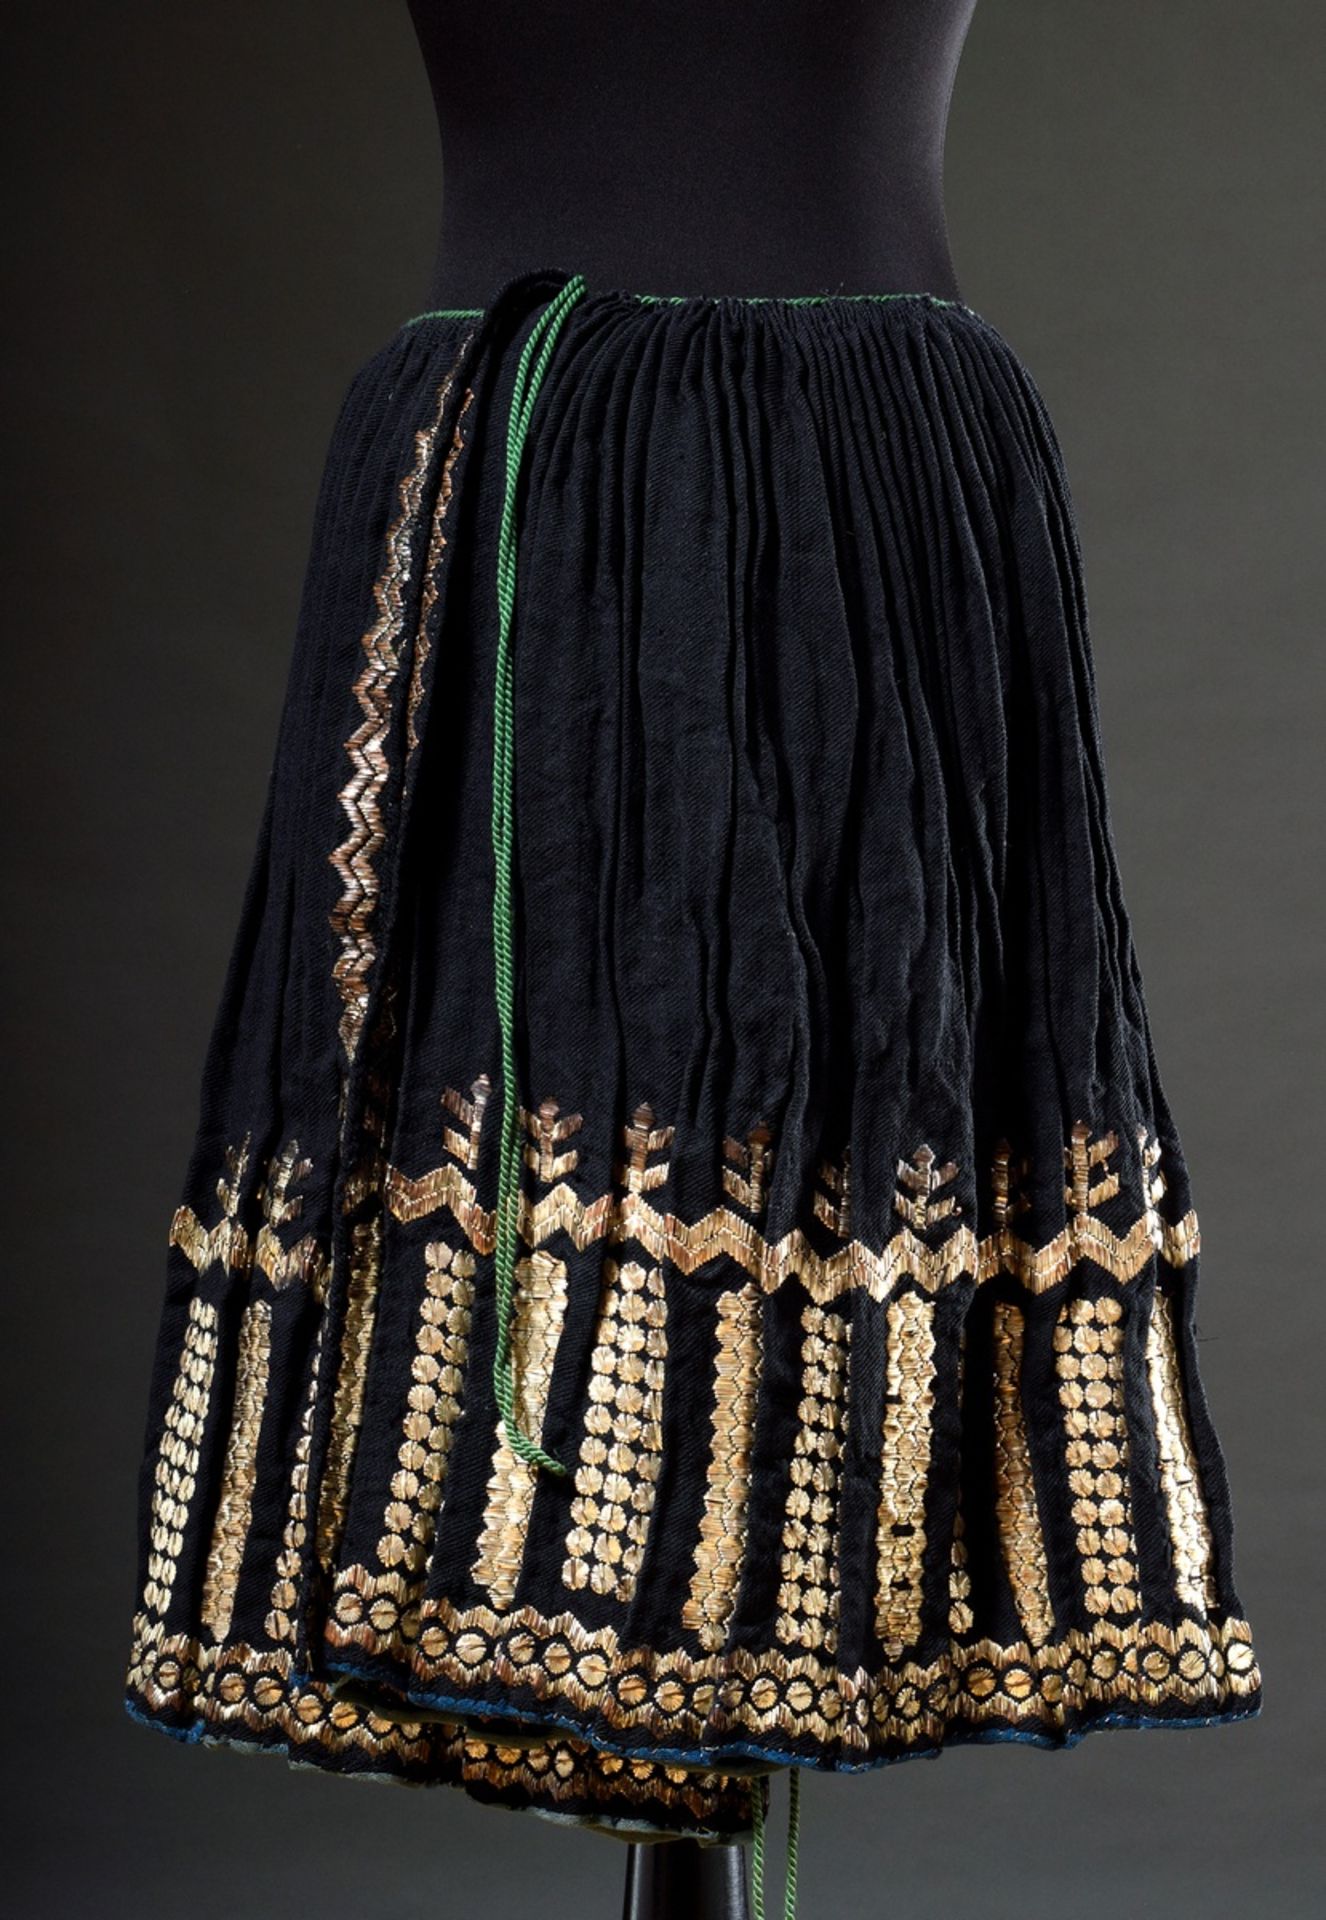 Black traditional wrap skirt of pleated wool with silver embroidery, heavy quality, probably Transy - Image 3 of 3